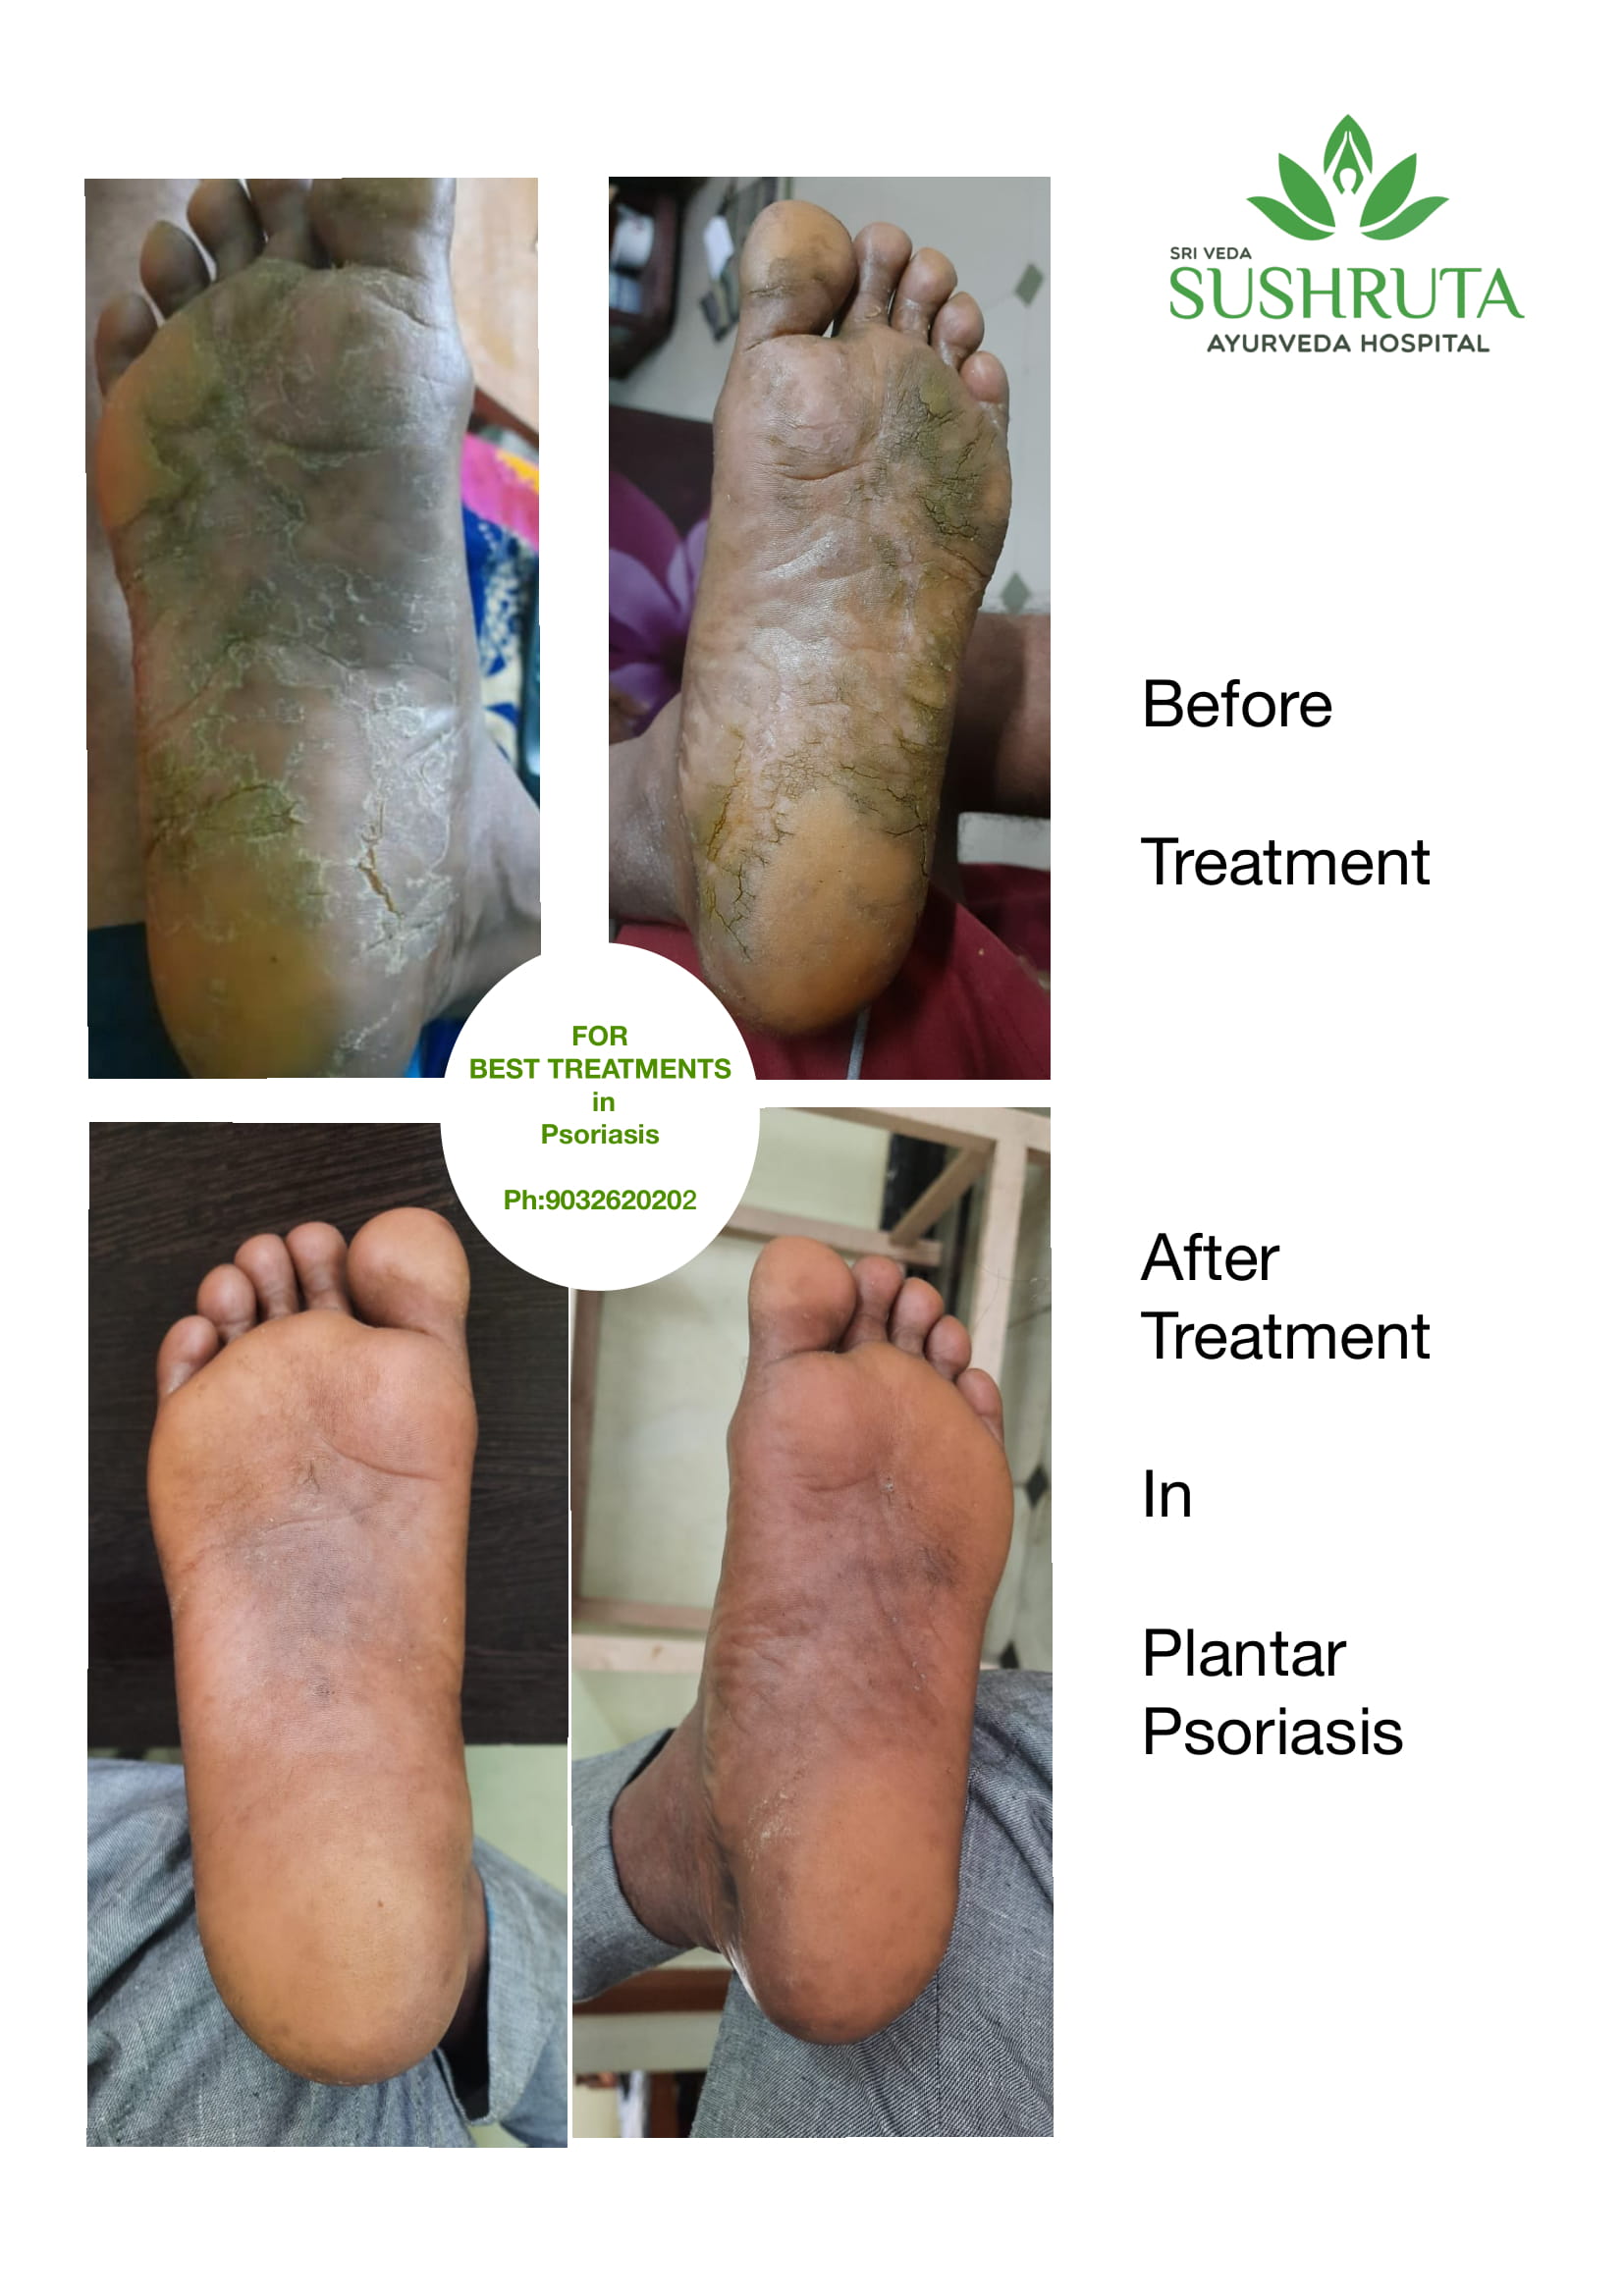 Plantar Psoriasis Before and After